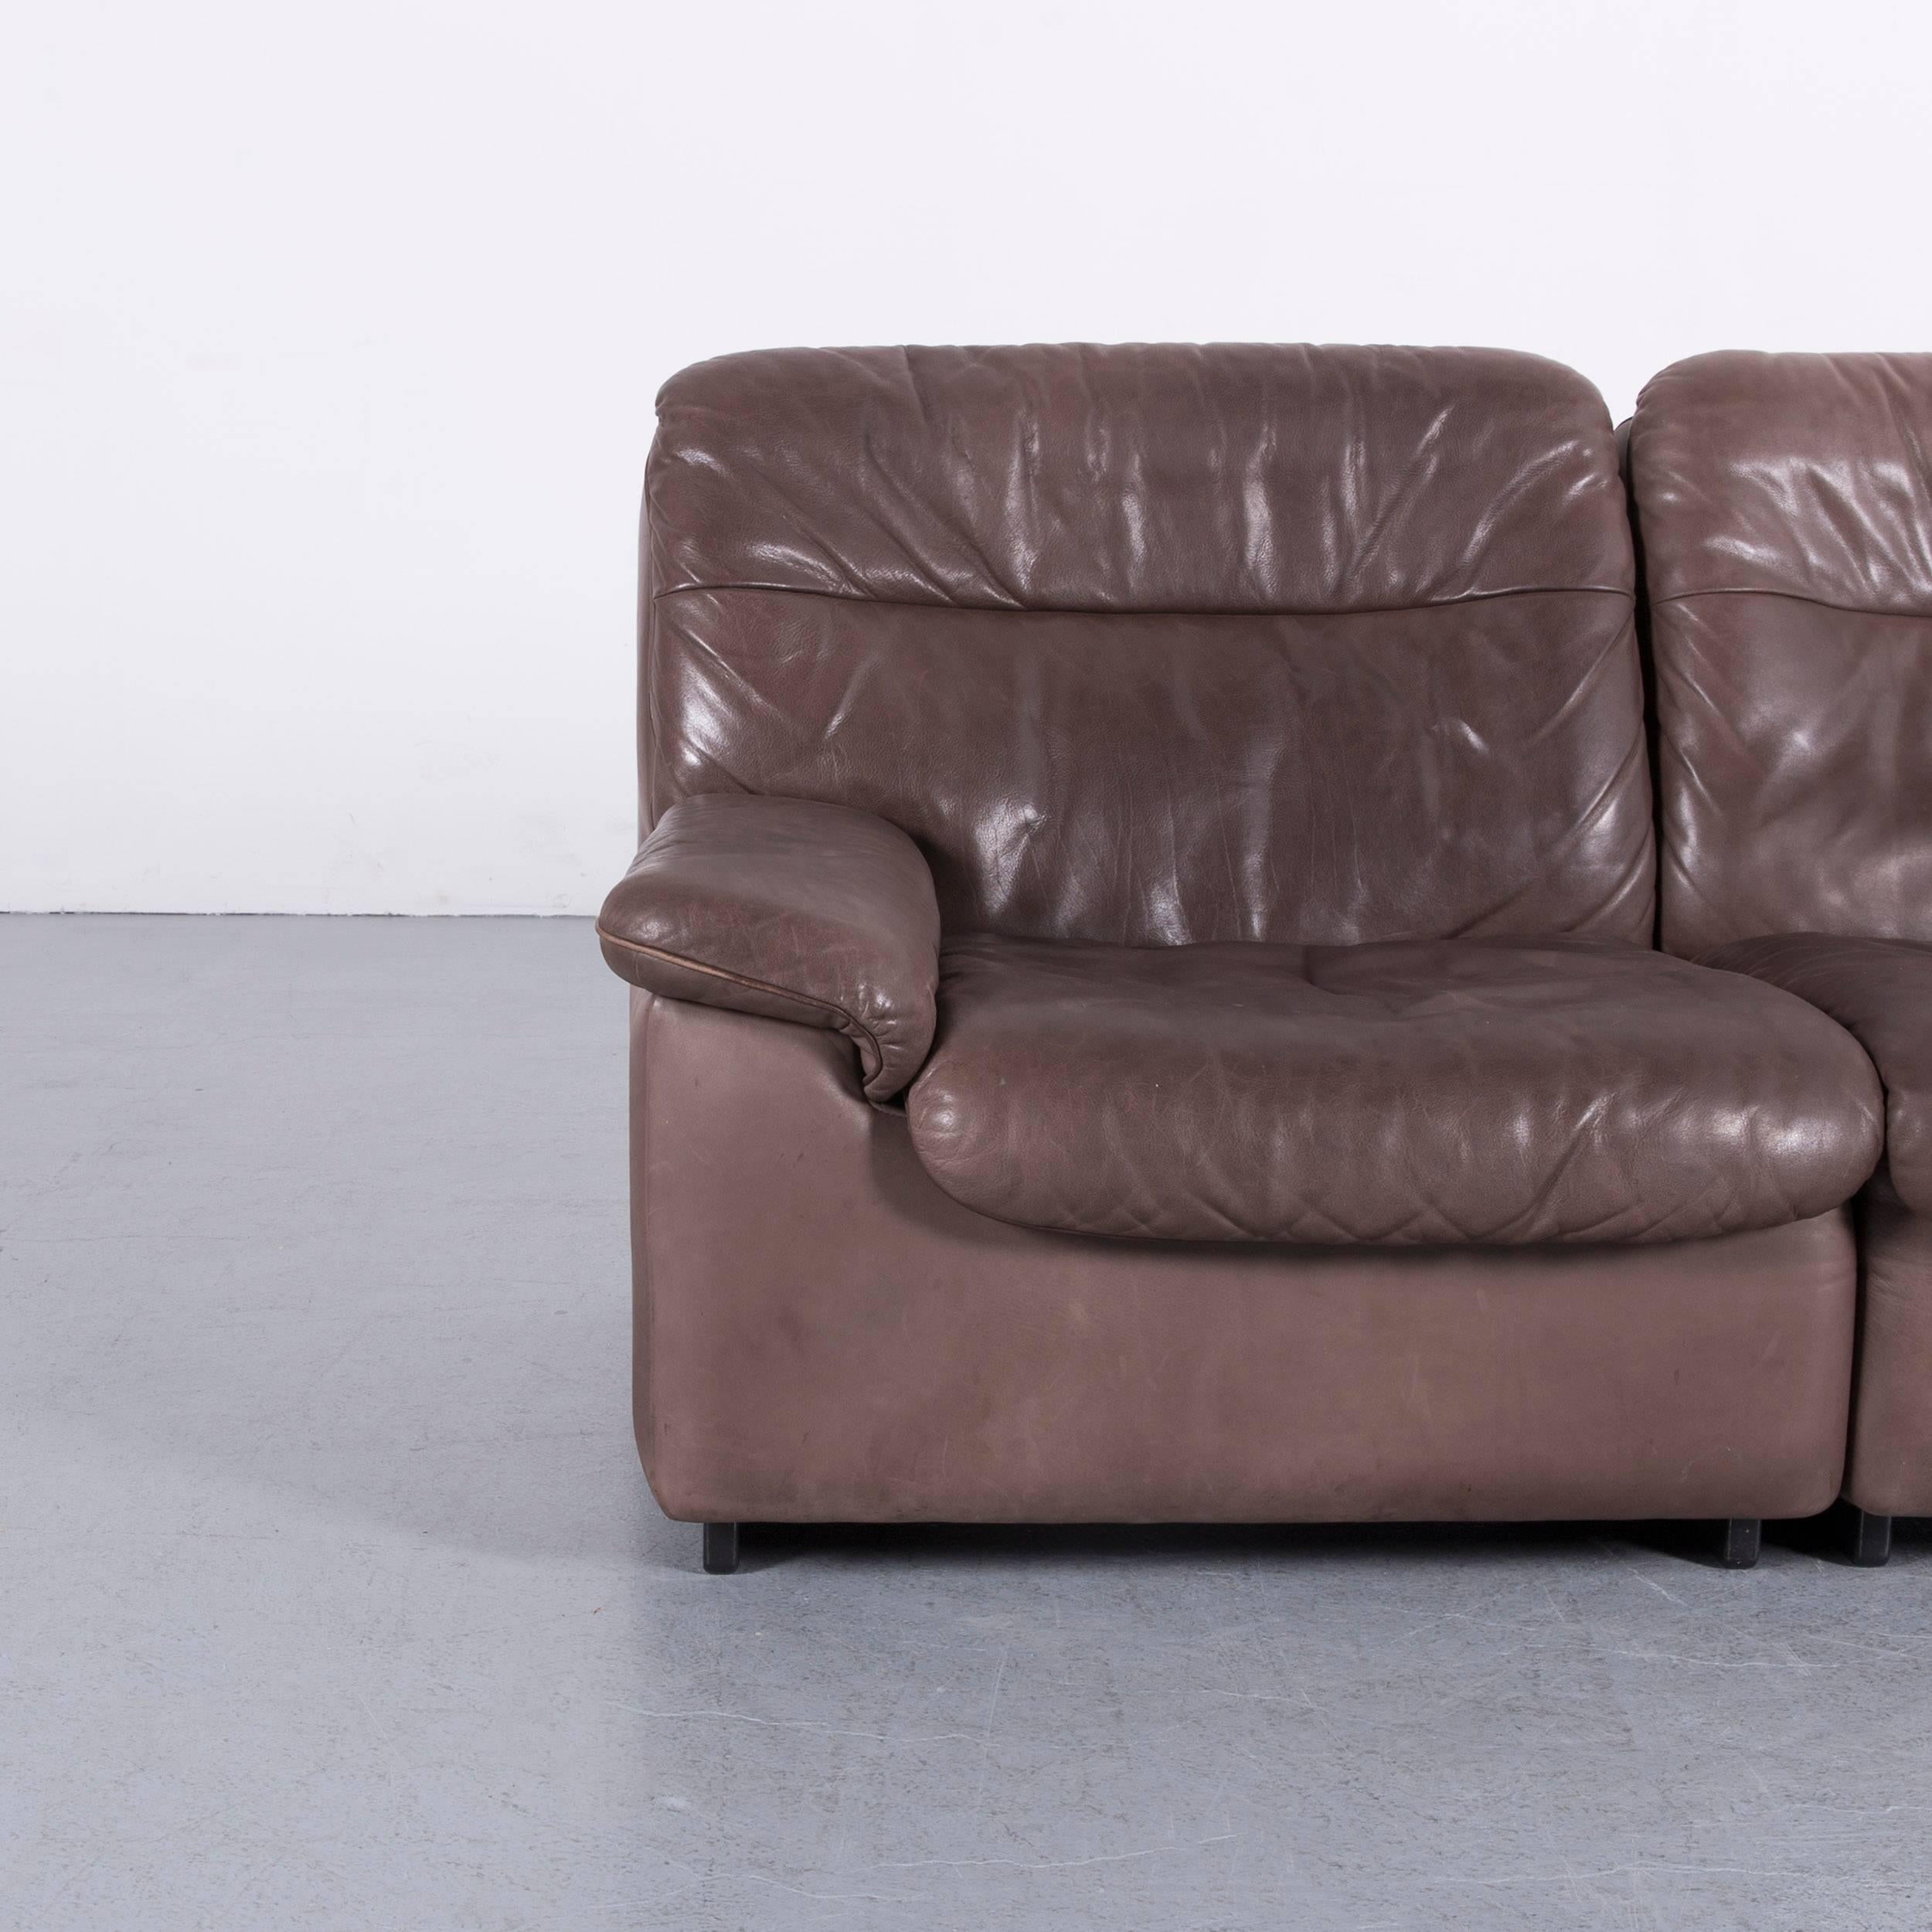 We bring to you an De Sede DS 66 designer sofa brown leather two-seat couch.